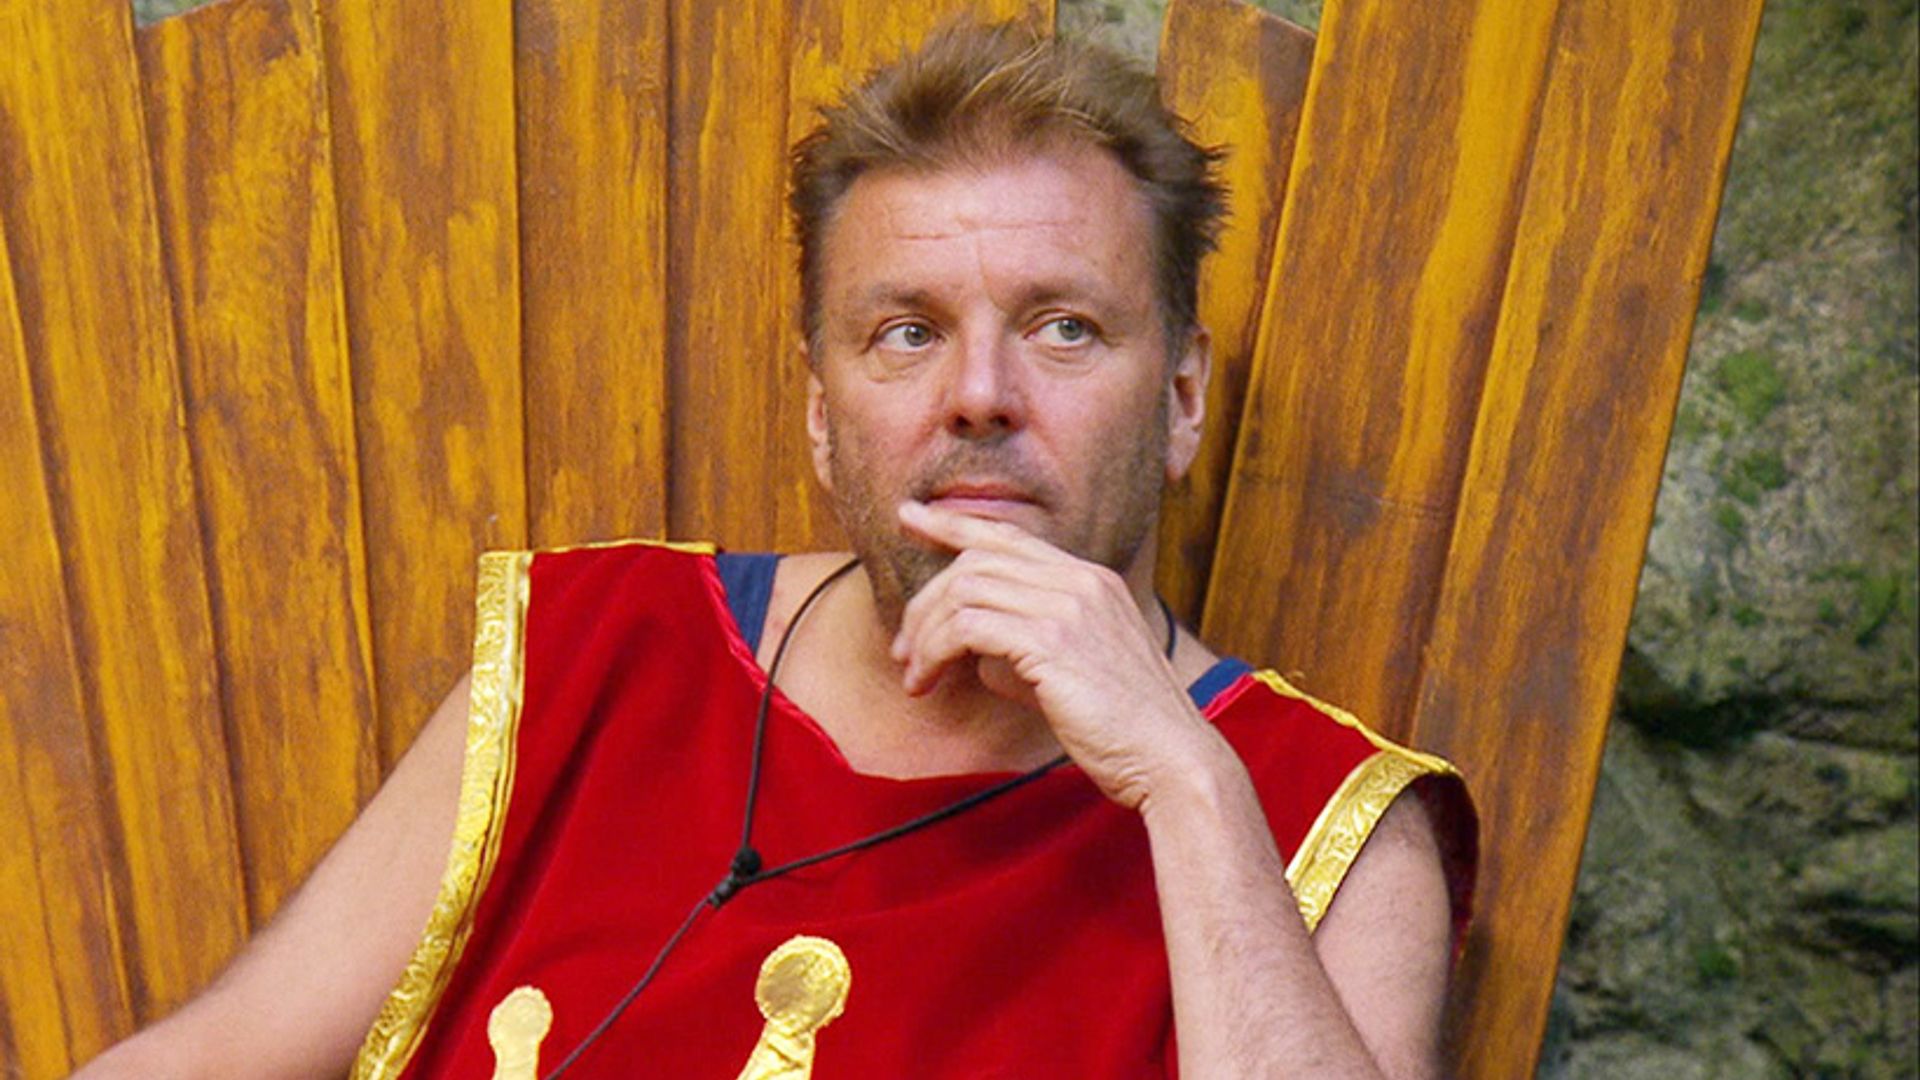 I'm A Celebrity viewers divided by treatment of Martin Roberts: 'This is bullying'